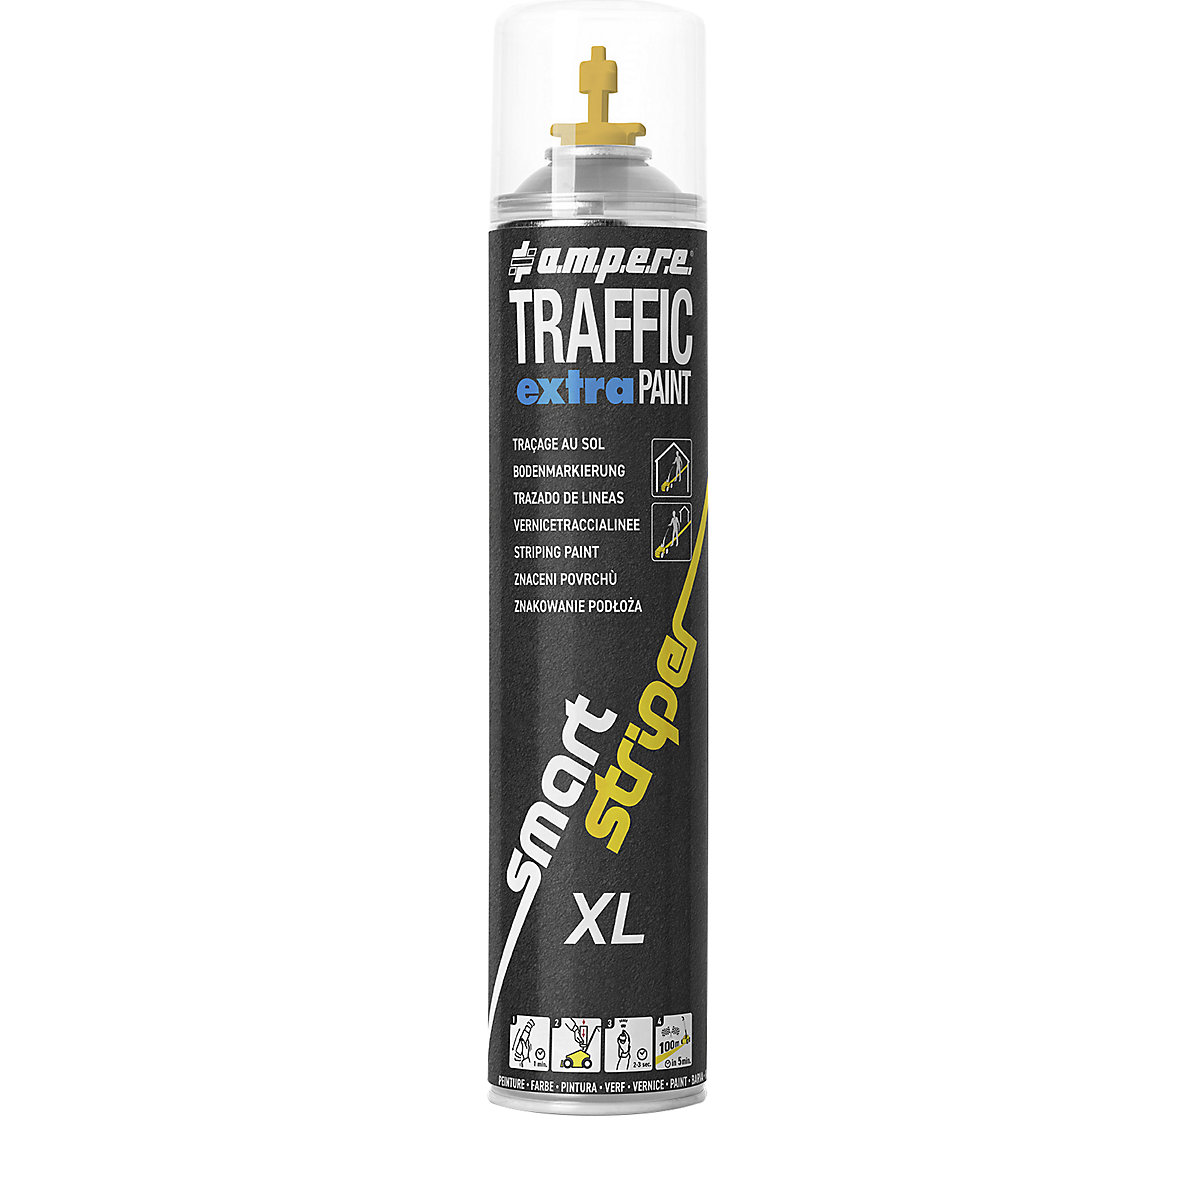 Traffic extra Paint® XL marking paint – Ampere, contents 750 ml, pack of 6, orange-4